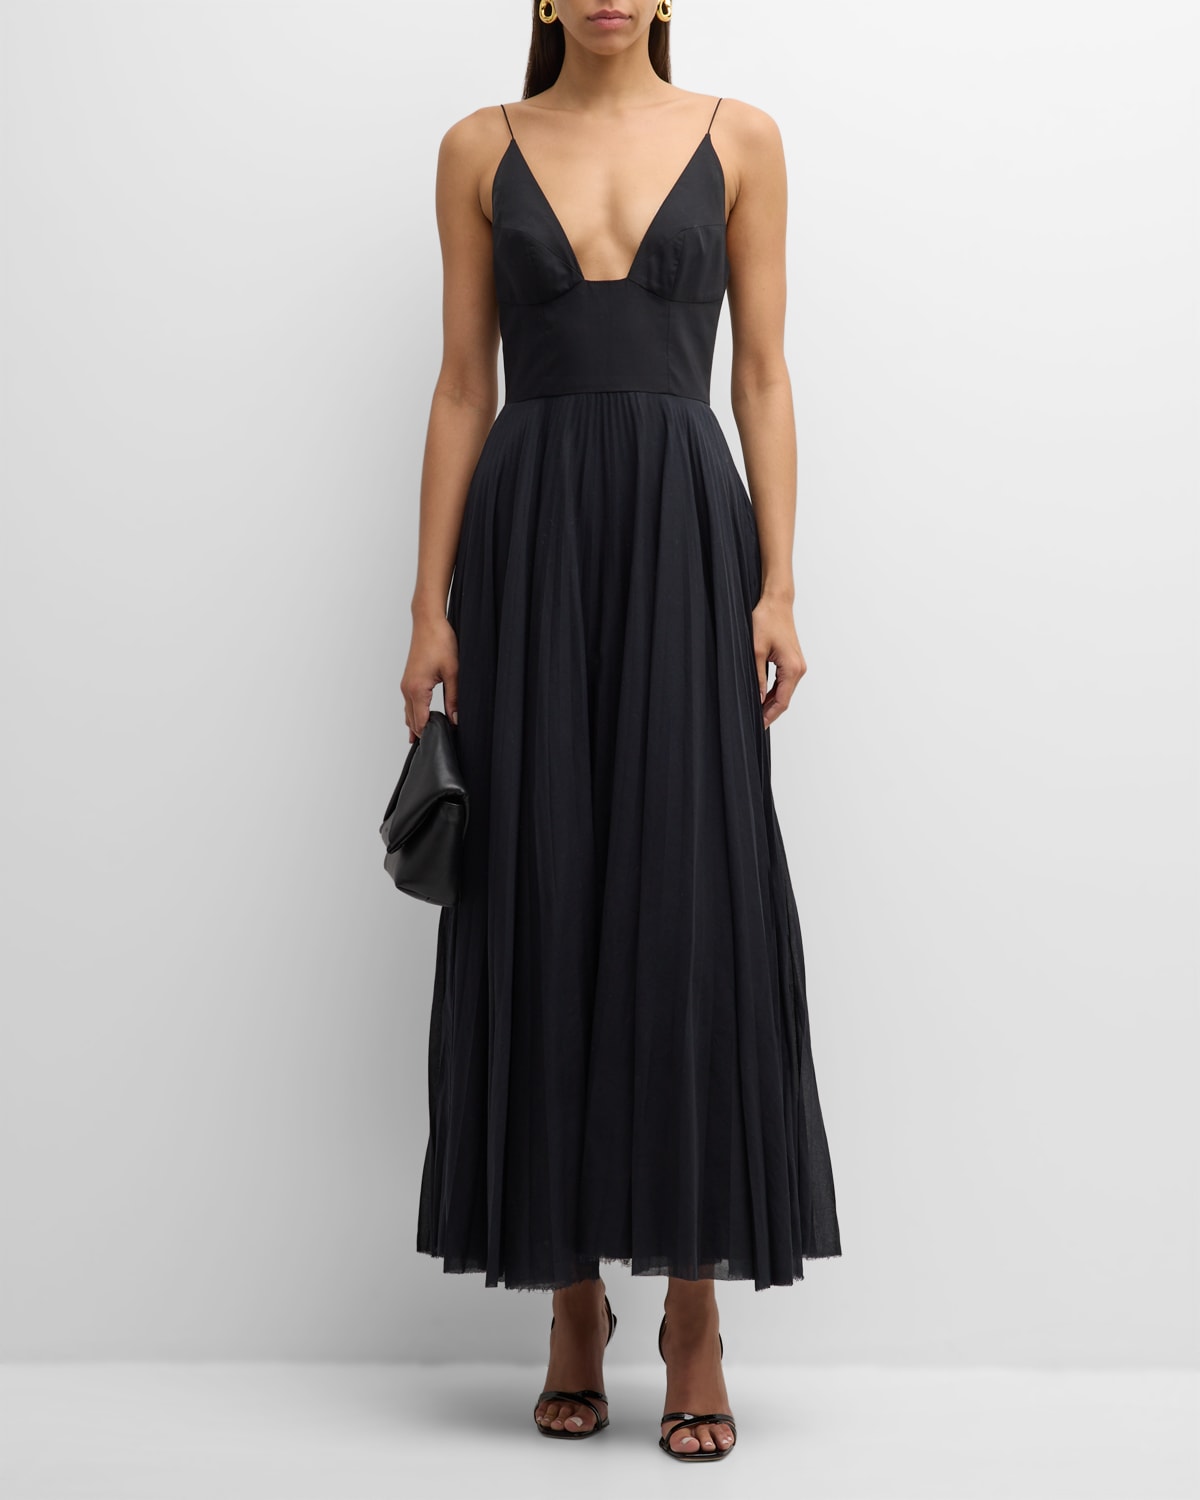 BRANDON MAXWELL BRALETTE-STYLE MAXI DRESS WITH PLEATED SKIRT